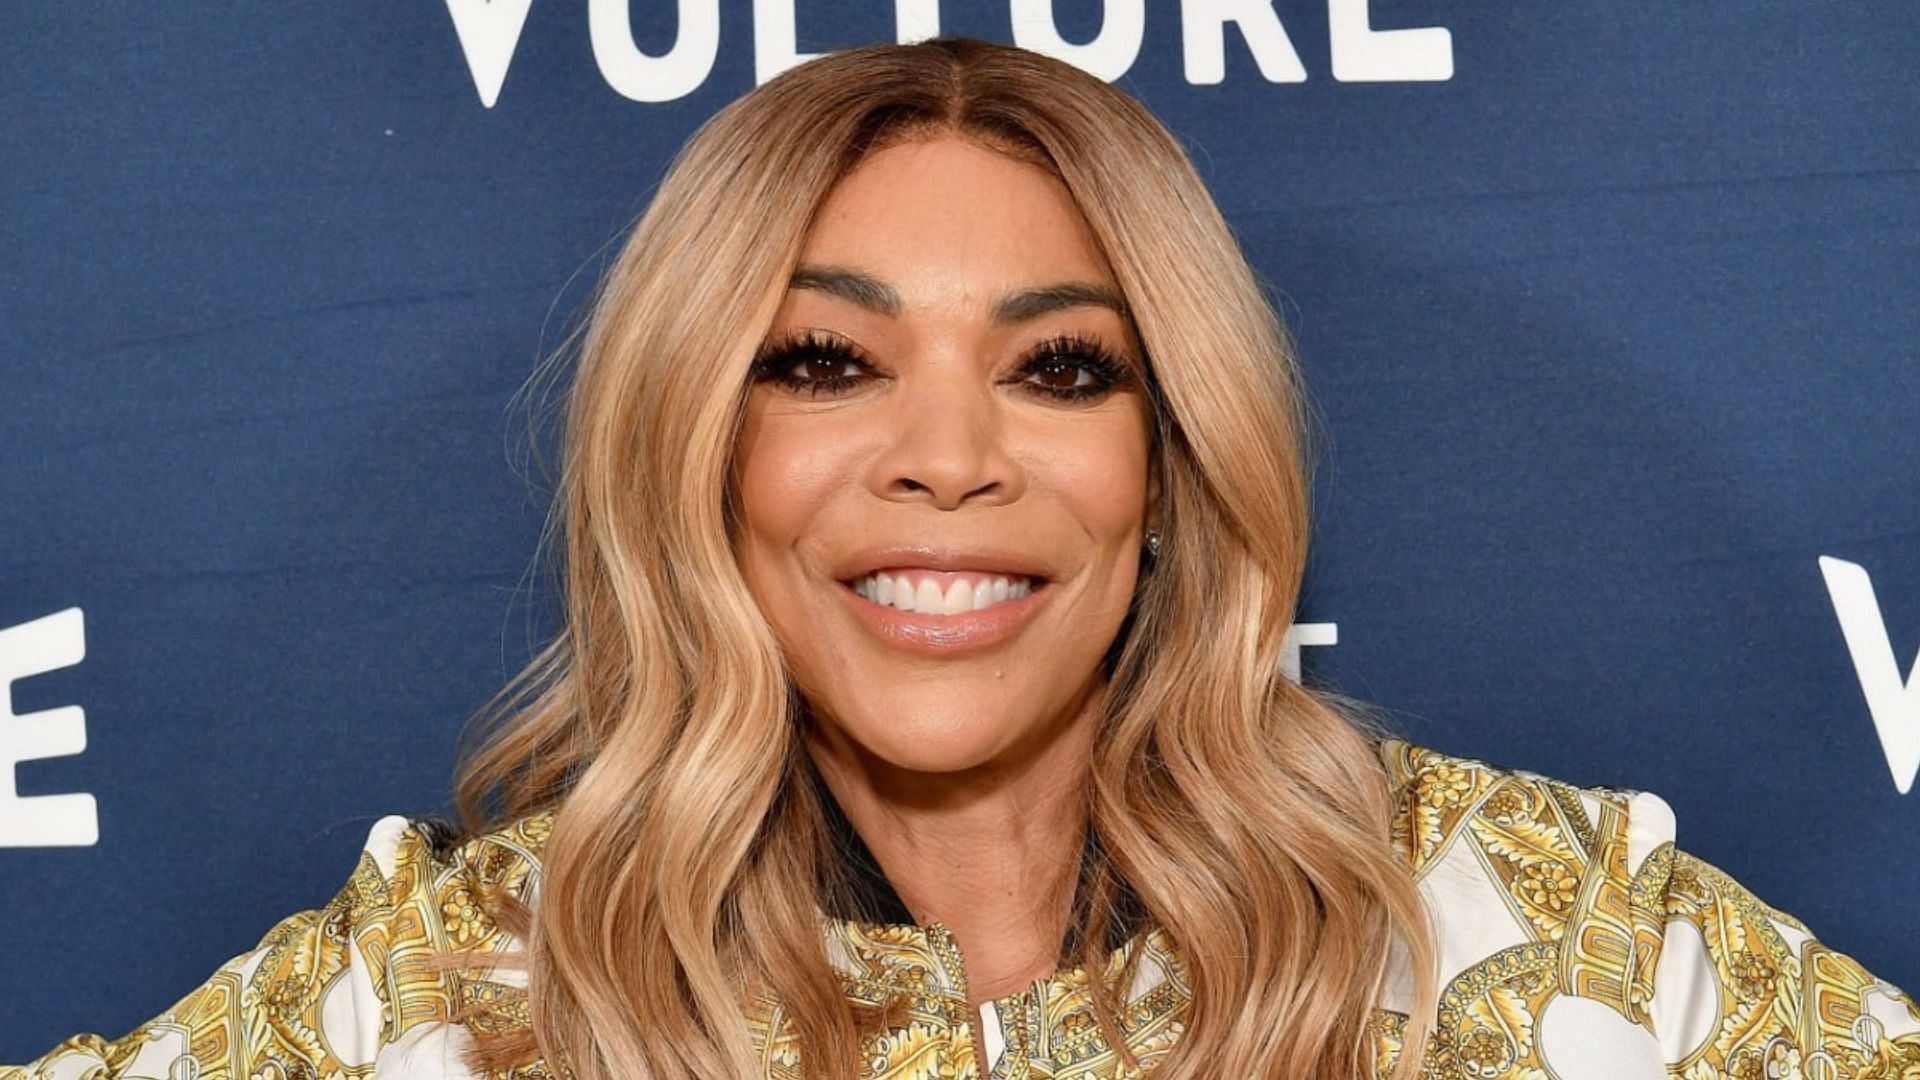 Wendy Williams said that her health is currently &quot;very well&quot; and she can make a return to TV in three months (Image via Dia Dipasupil/Getty Images)